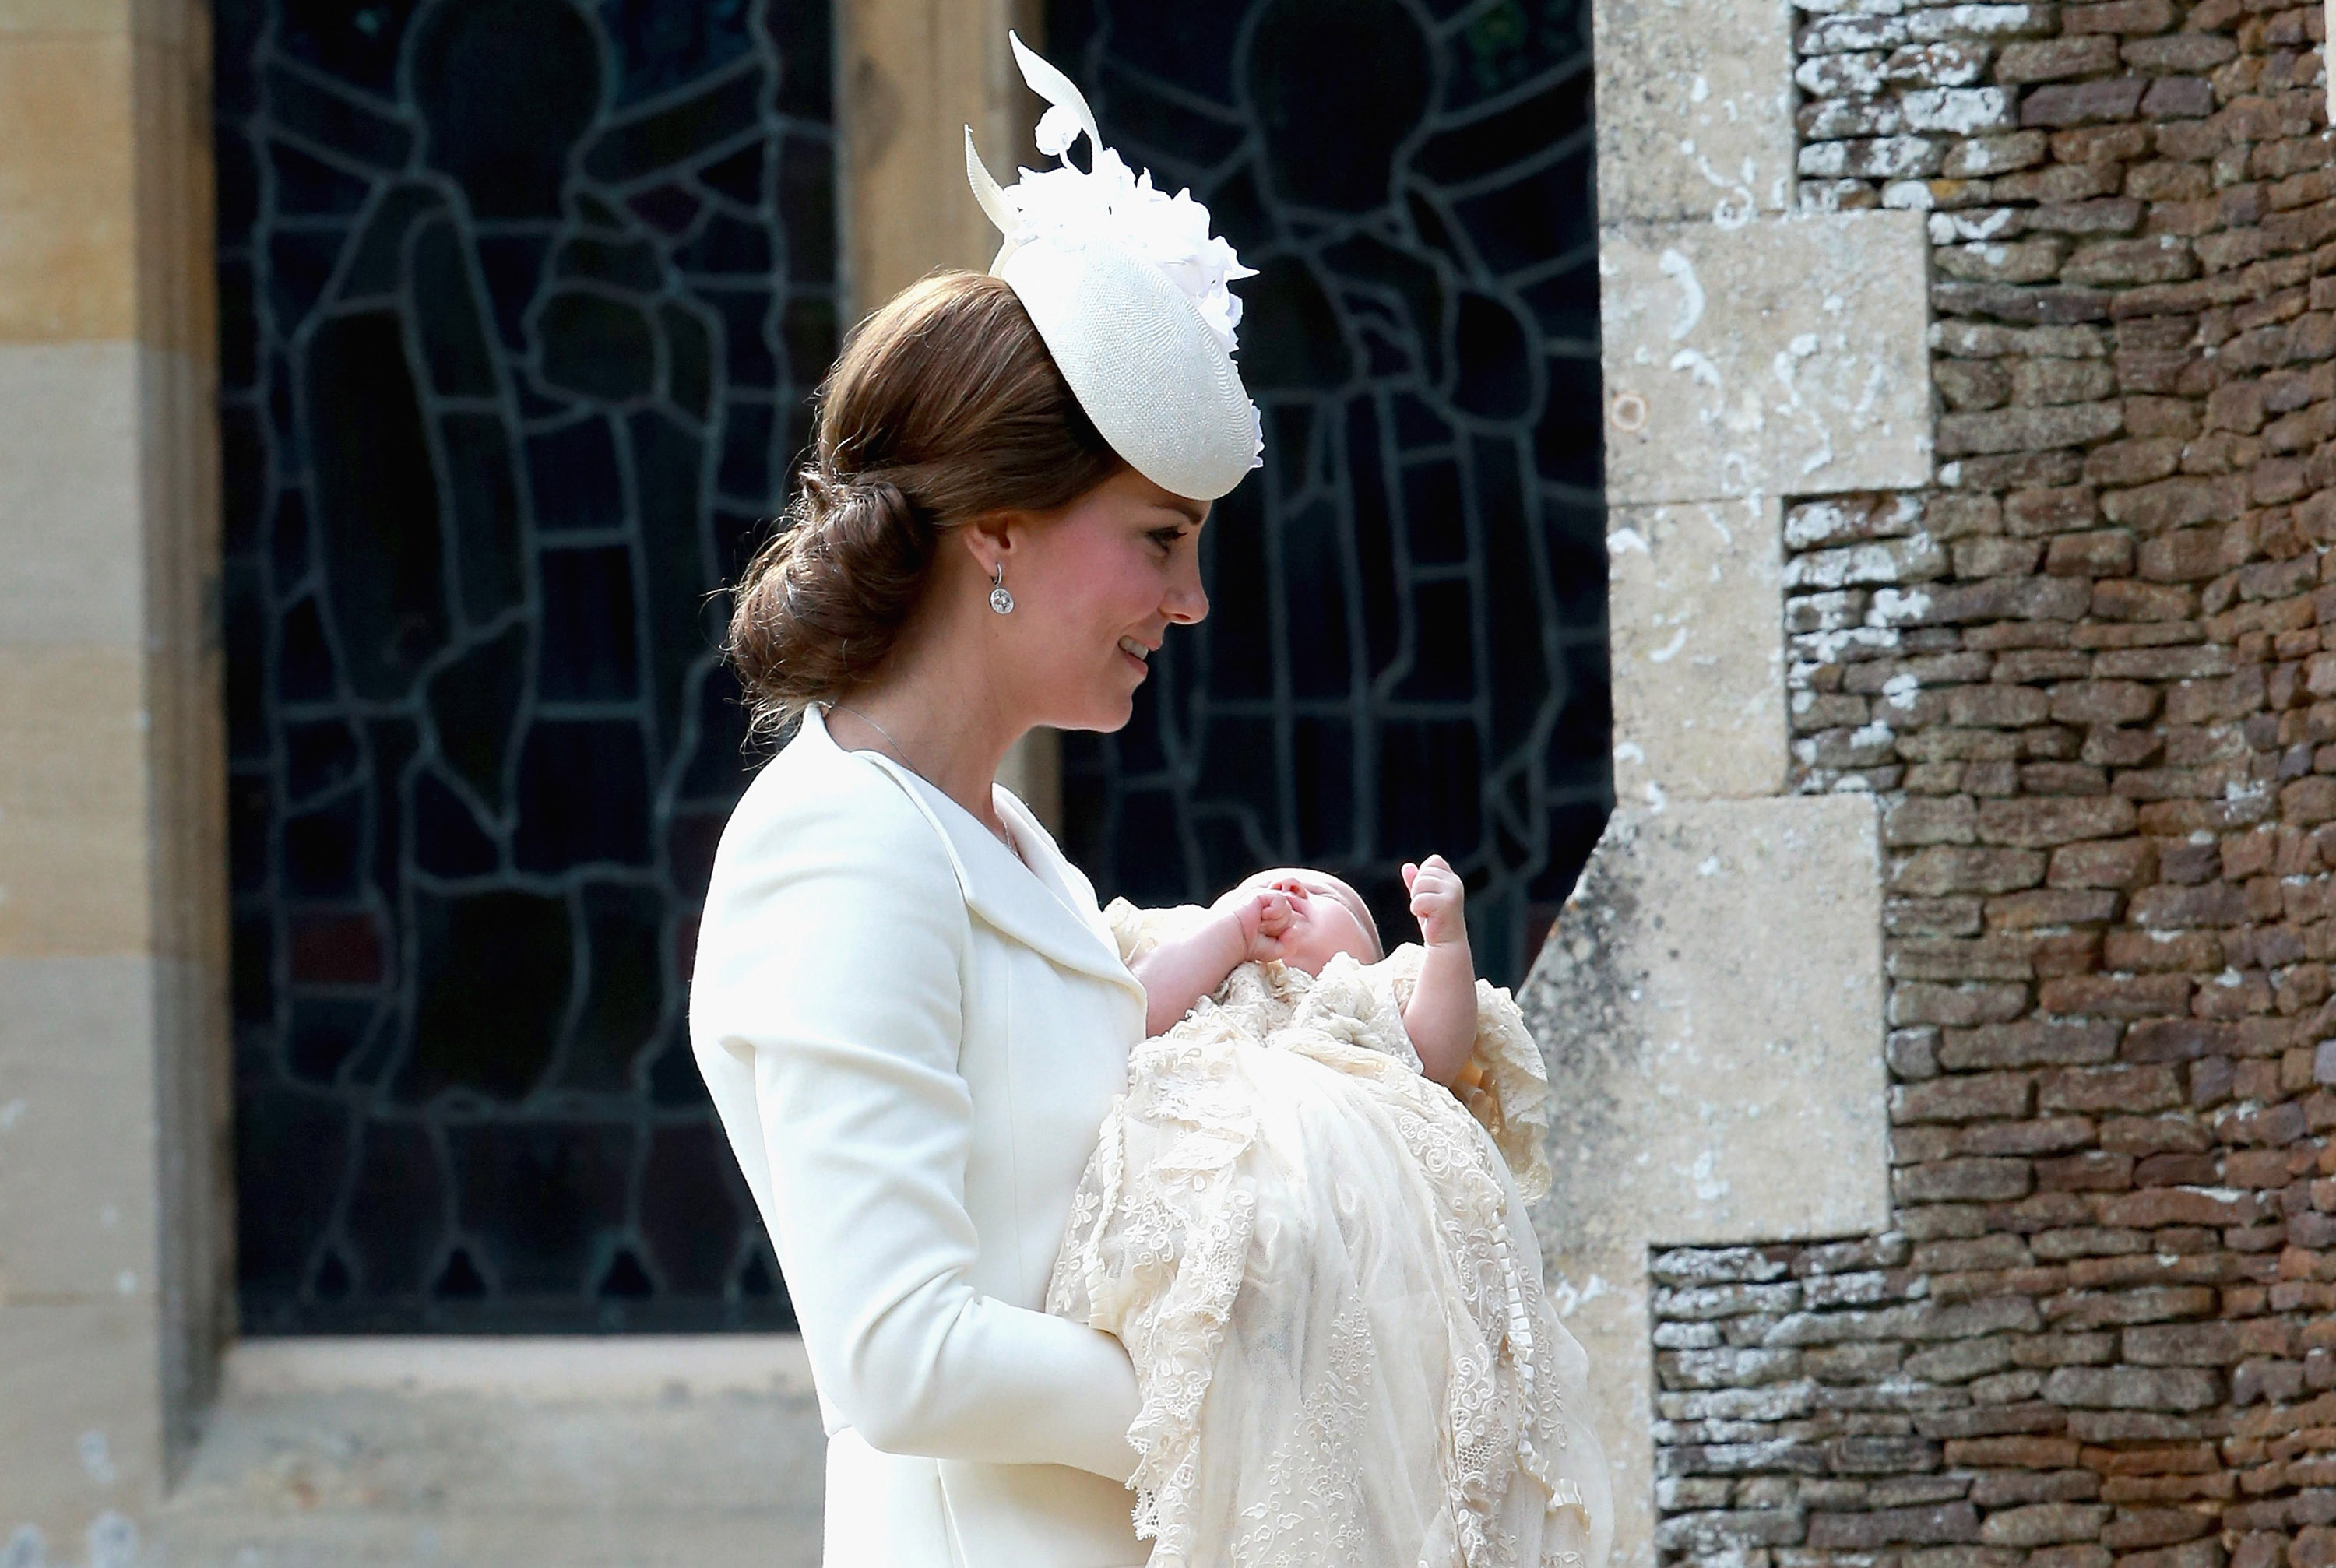 The Duchess of Cambridge carries Princess Charlotte as they arrive at the Church of St Mary Magdalene in Sandringham, England on July 5, 2015, as Princess Charlotte will be christened in front of the Queen and close family.